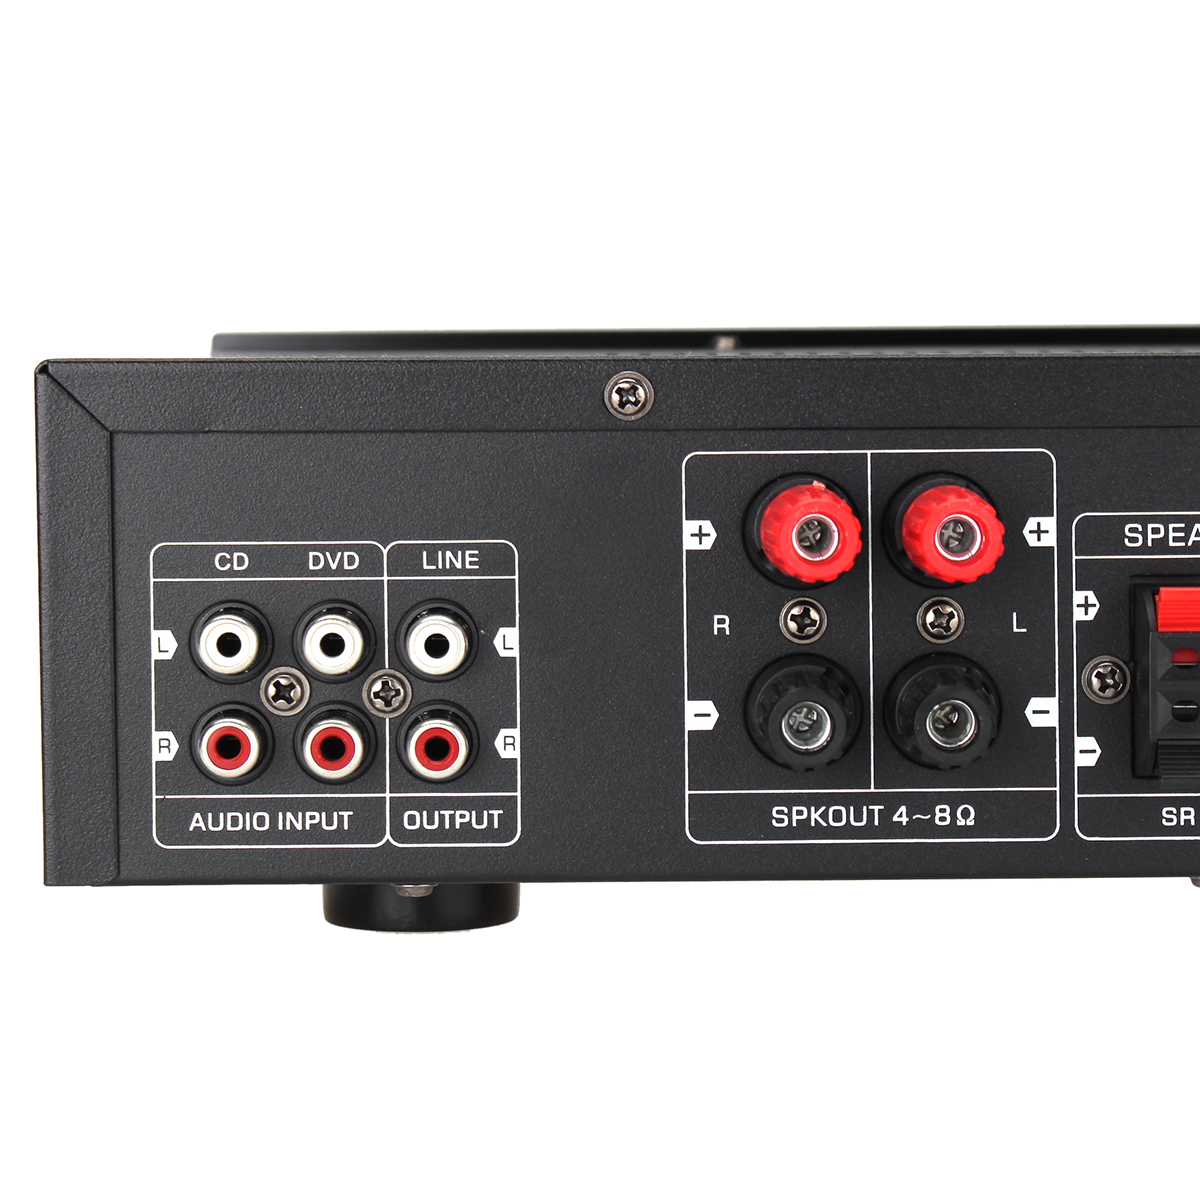 Find Sunbuck TAV-6188E 2000W bluetooth5.0 Audio Amplifier Stereo Home Theater AMP Car Home 2CH AUX USB FM SD for Sale on Gipsybee.com with cryptocurrencies